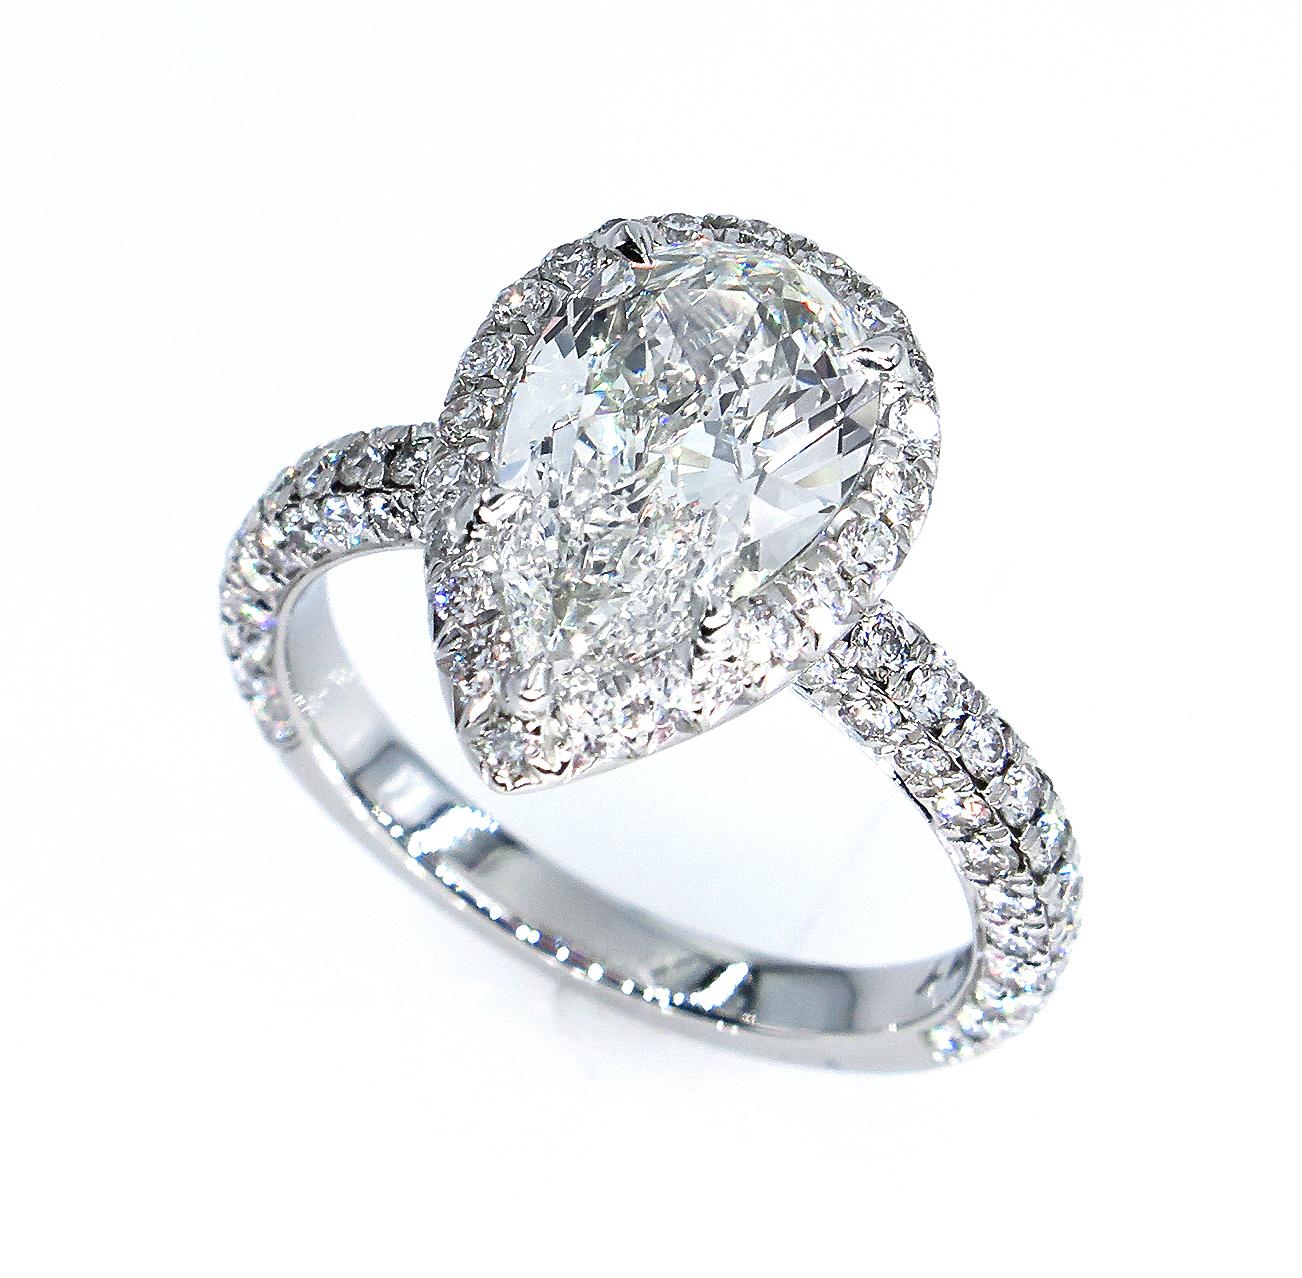 SUPER Elegant Timeless Micro Pave Platinum (stamped) Diamond Halo PEAR Diamond ring from our Estate Collection.
The Center diamond is 1.61CT J color, VS1 clarity GIA CERTIFIED. GREAT CUT and AMAZING BRILLIANCE!
The Diamond is White, Bright, and Very